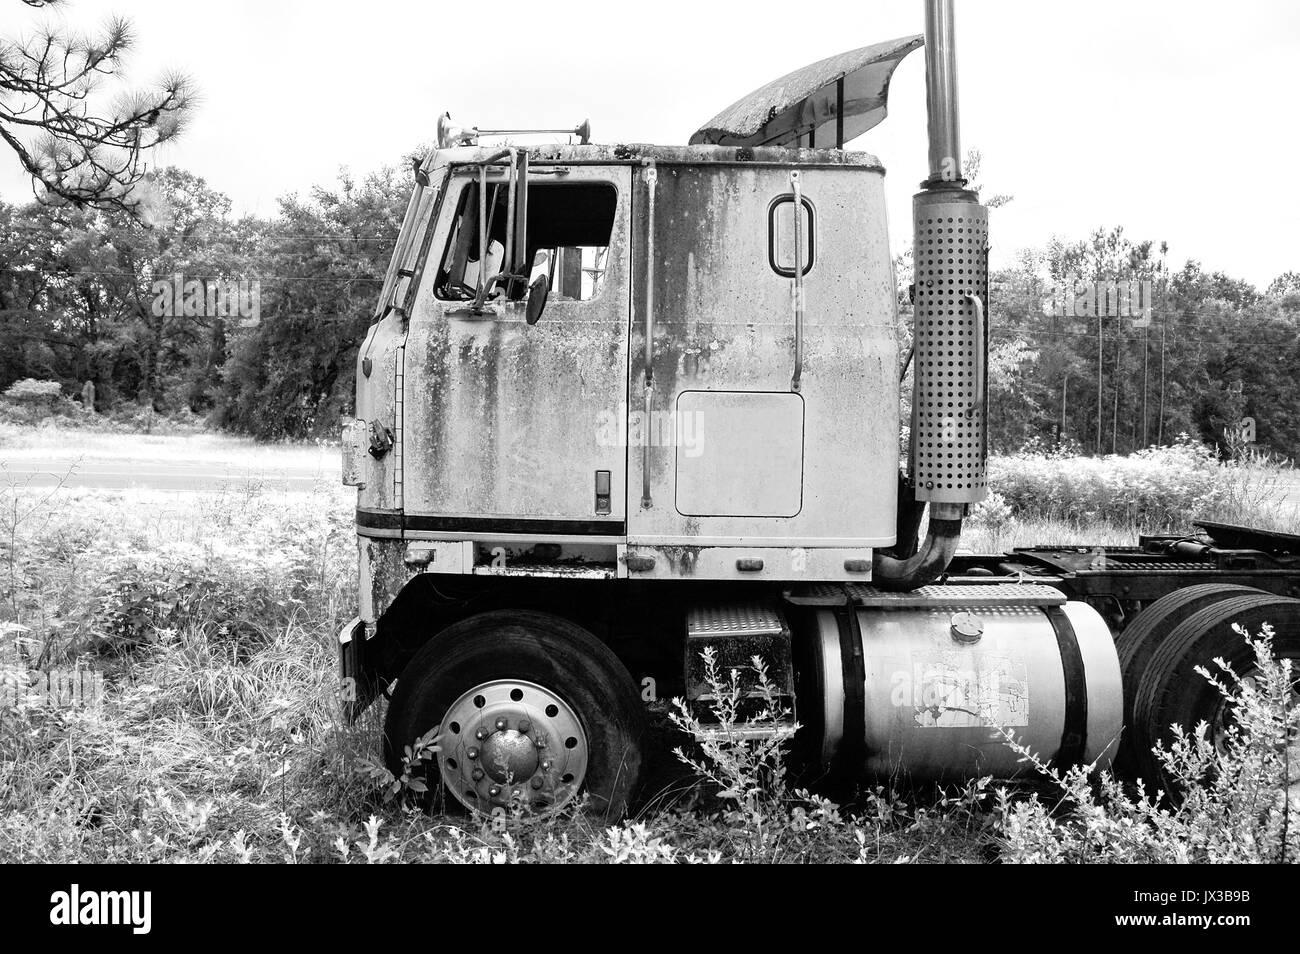 Abandoned tractor trailer cab in a rural area. Stock Photo